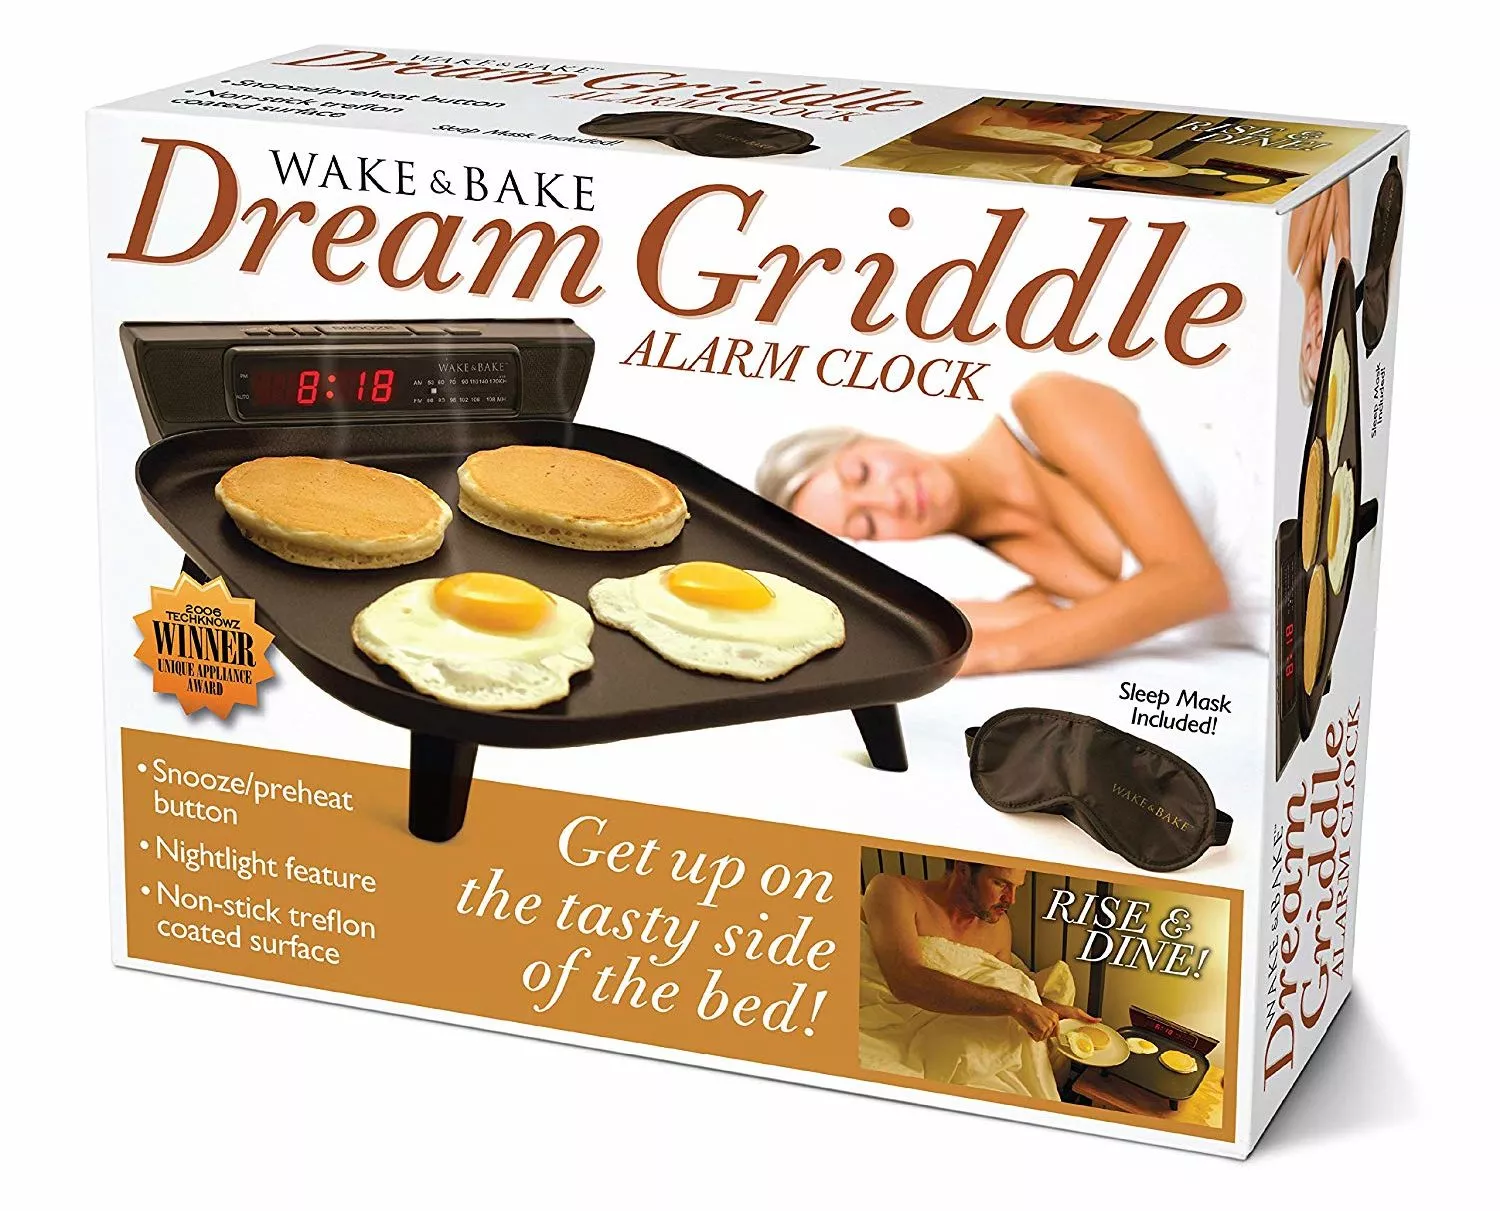 Best Coworker Gifts 2023: Funny Dream Griddle Alarm Clock Prank for Boss 2023